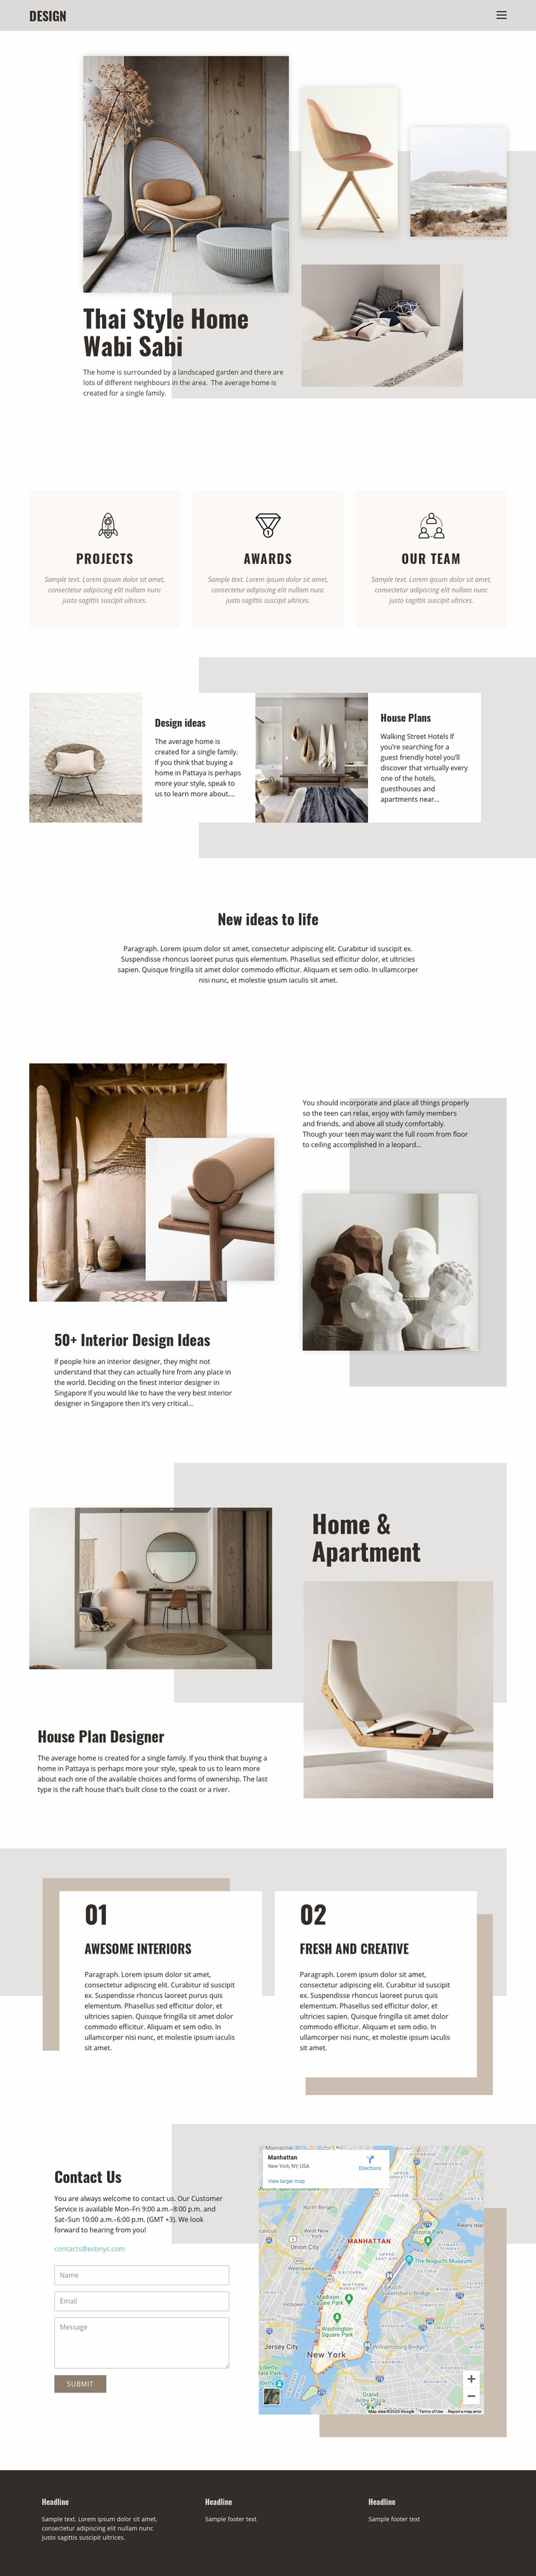 Thai home styling interior Web Page Design